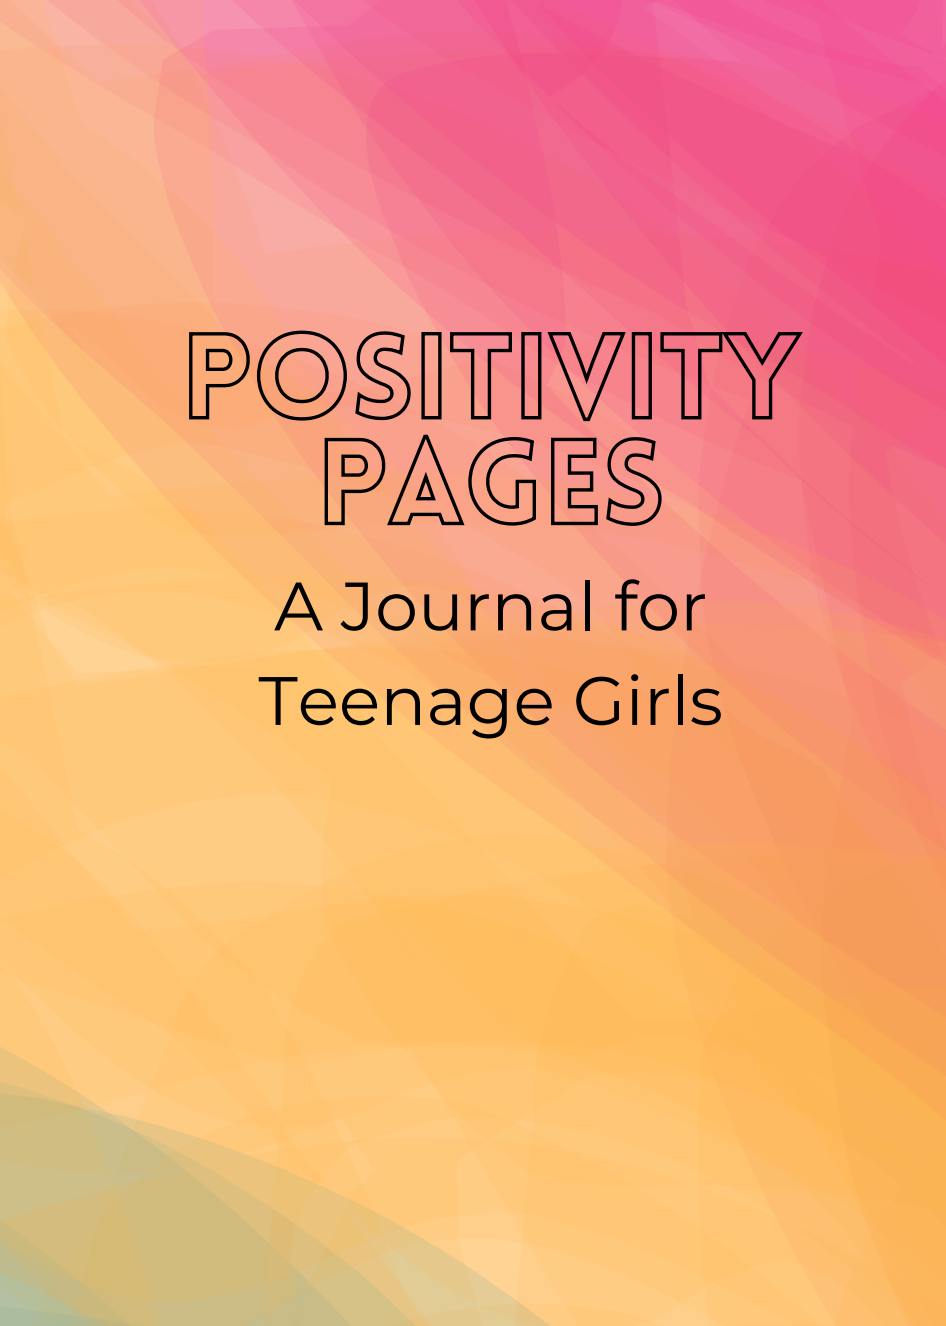 Positivity Pages: A Journal for Teenage Girls